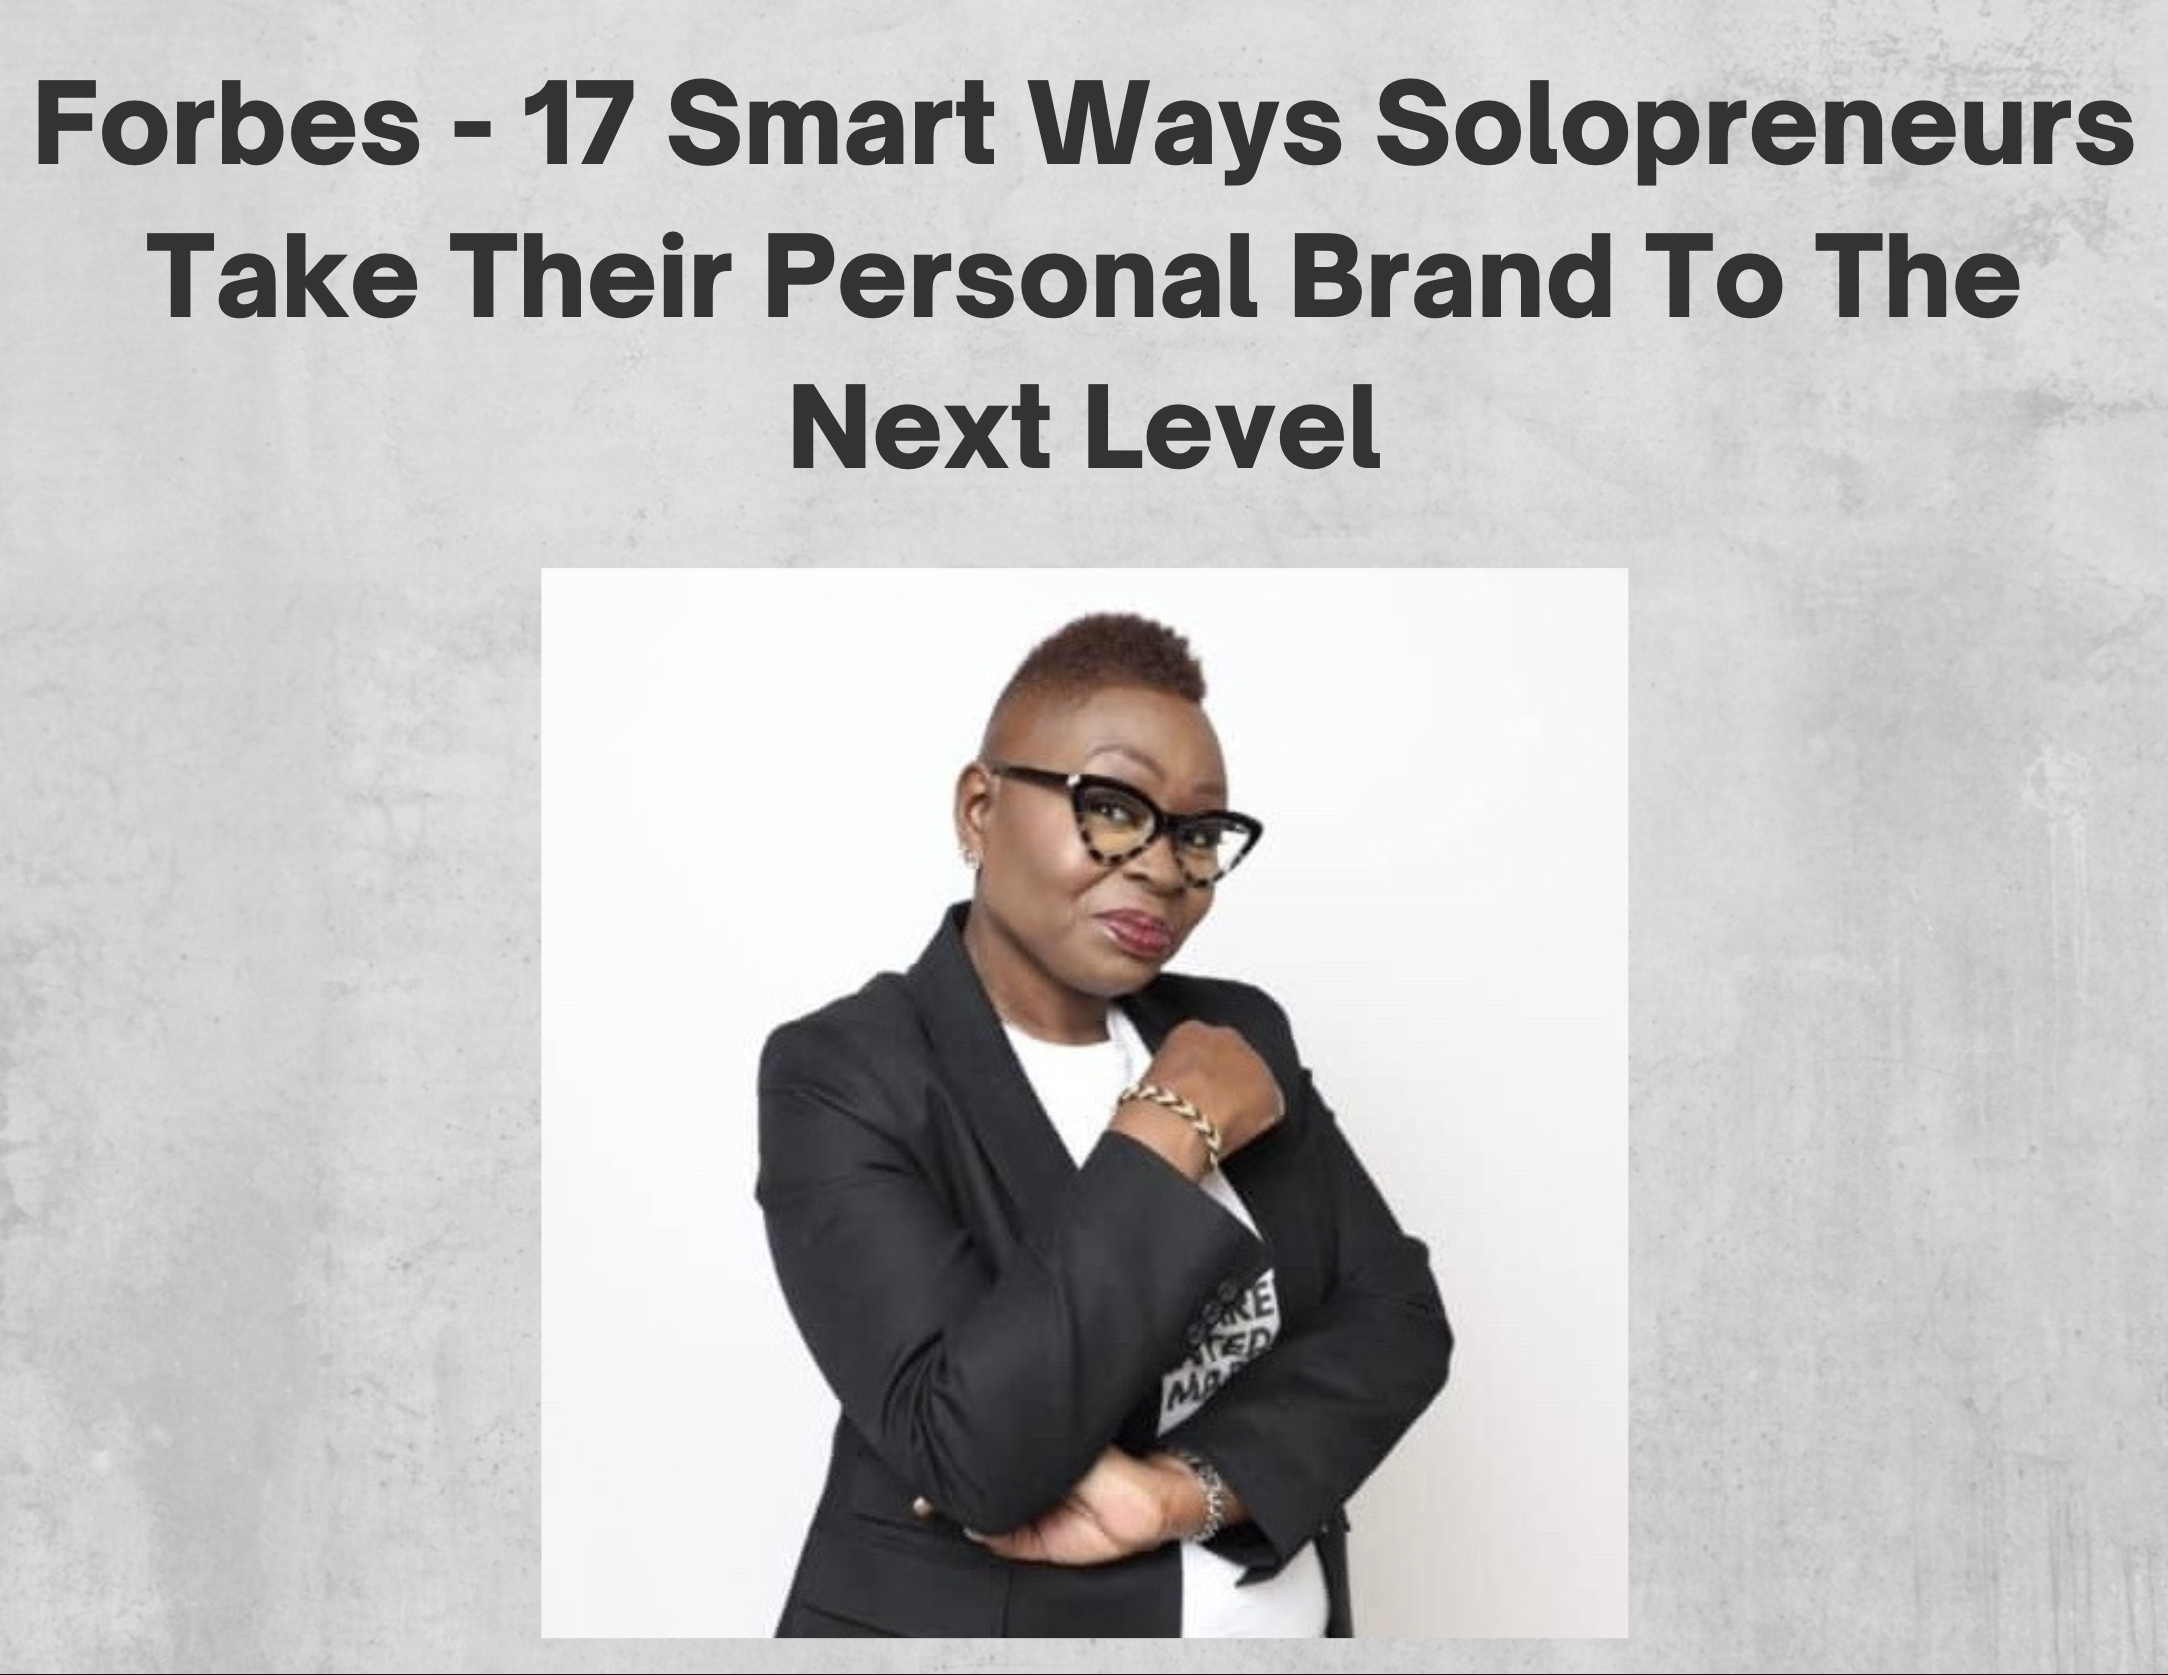 17 Smart Ways Solopreneurs Take Their Personal Brand To The Next Level